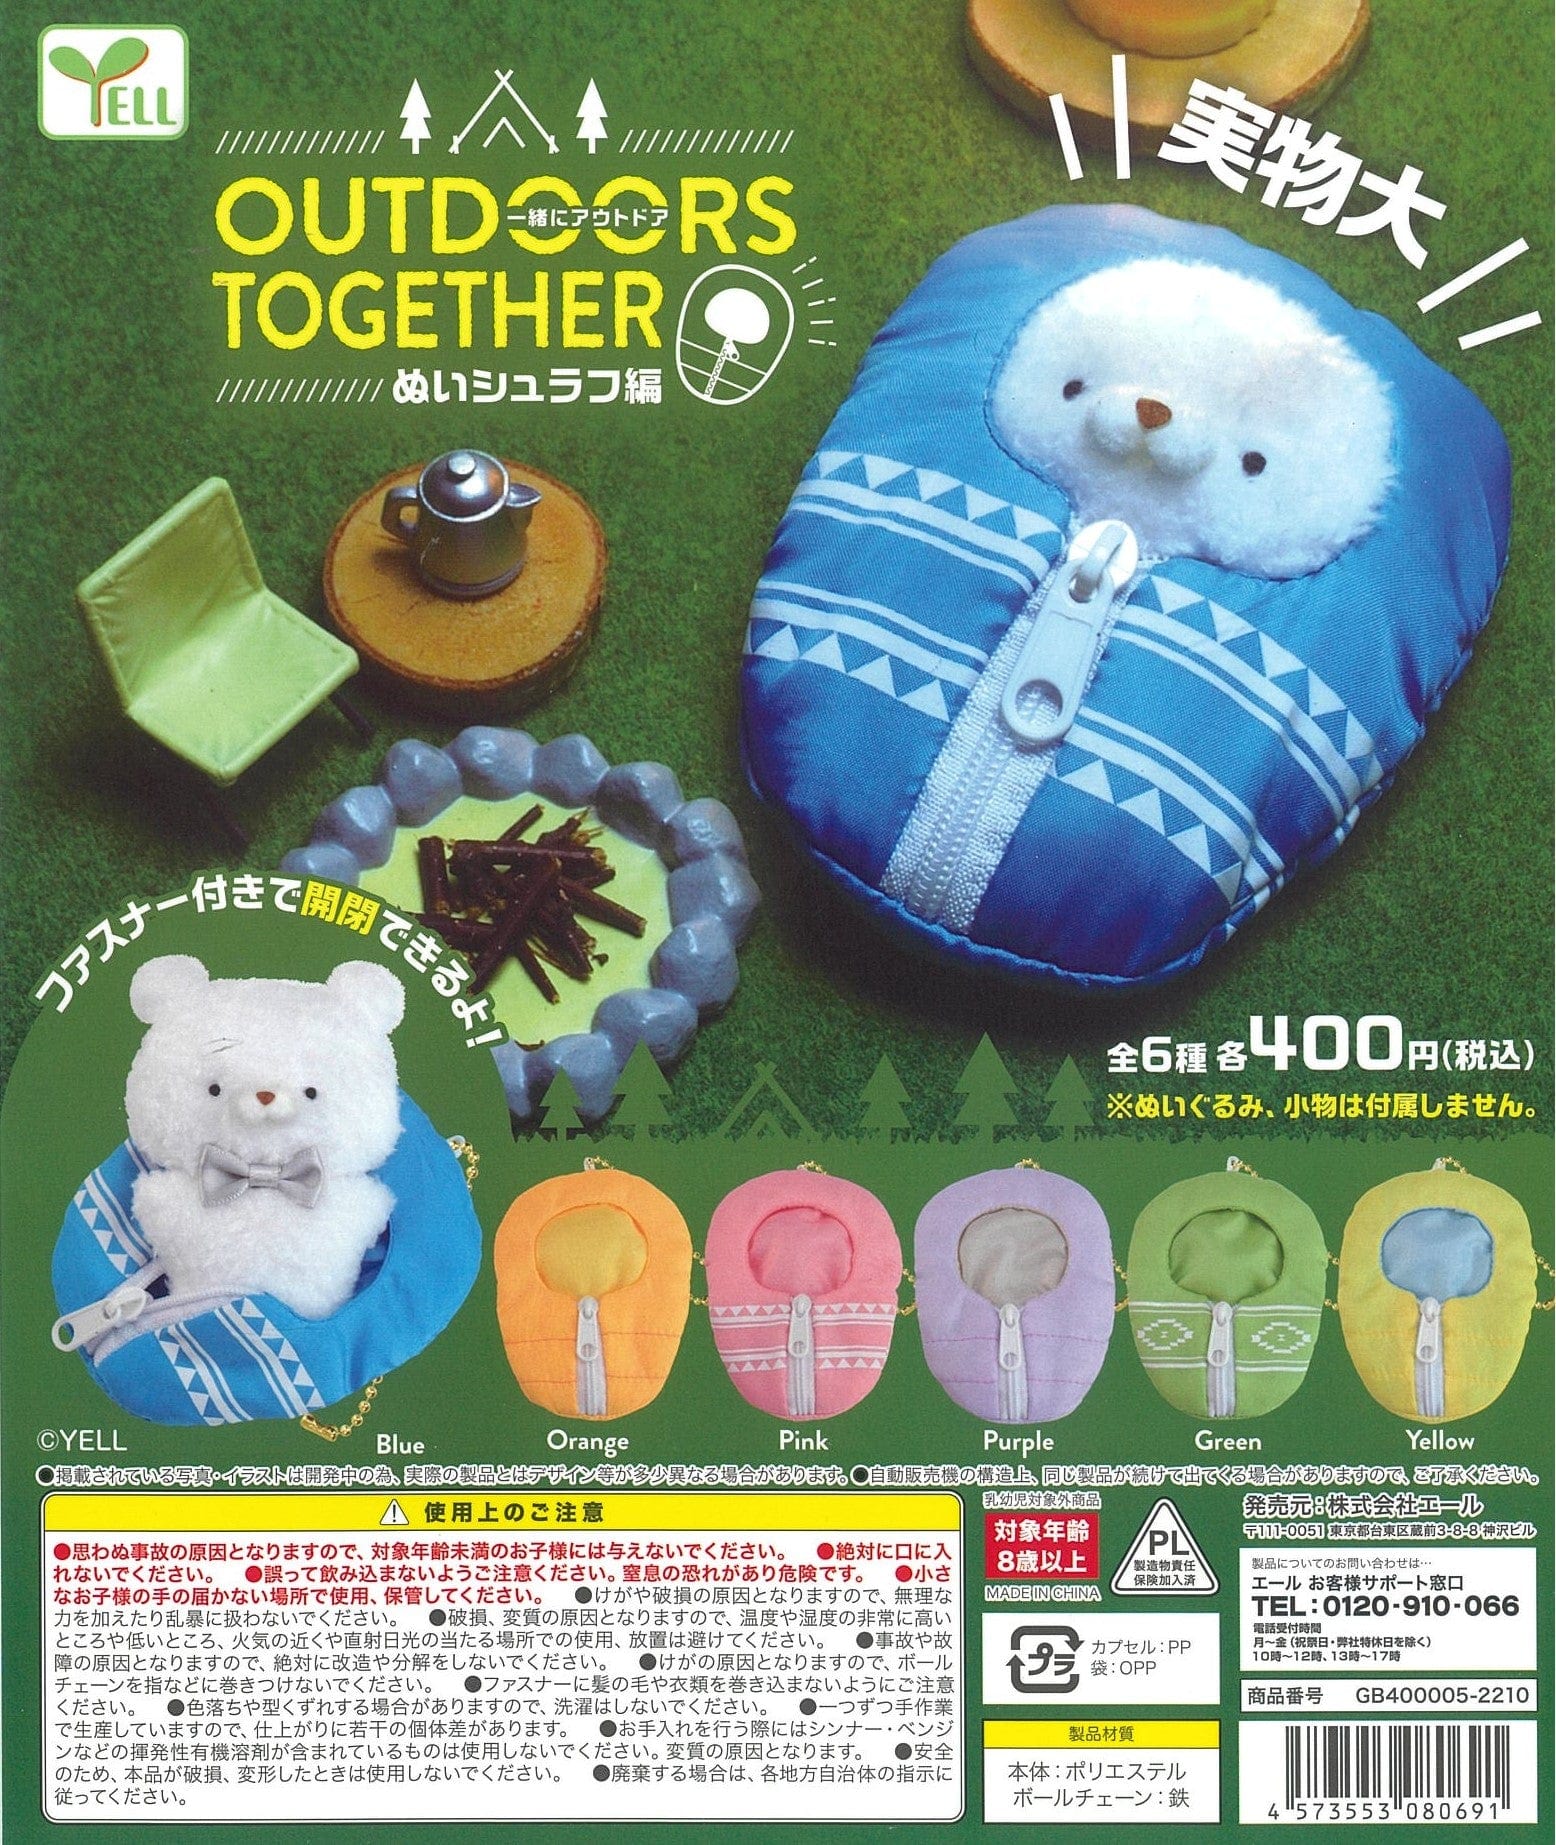 Yell CP1973 Outdoors Together Nui Sleeping Bag Ver